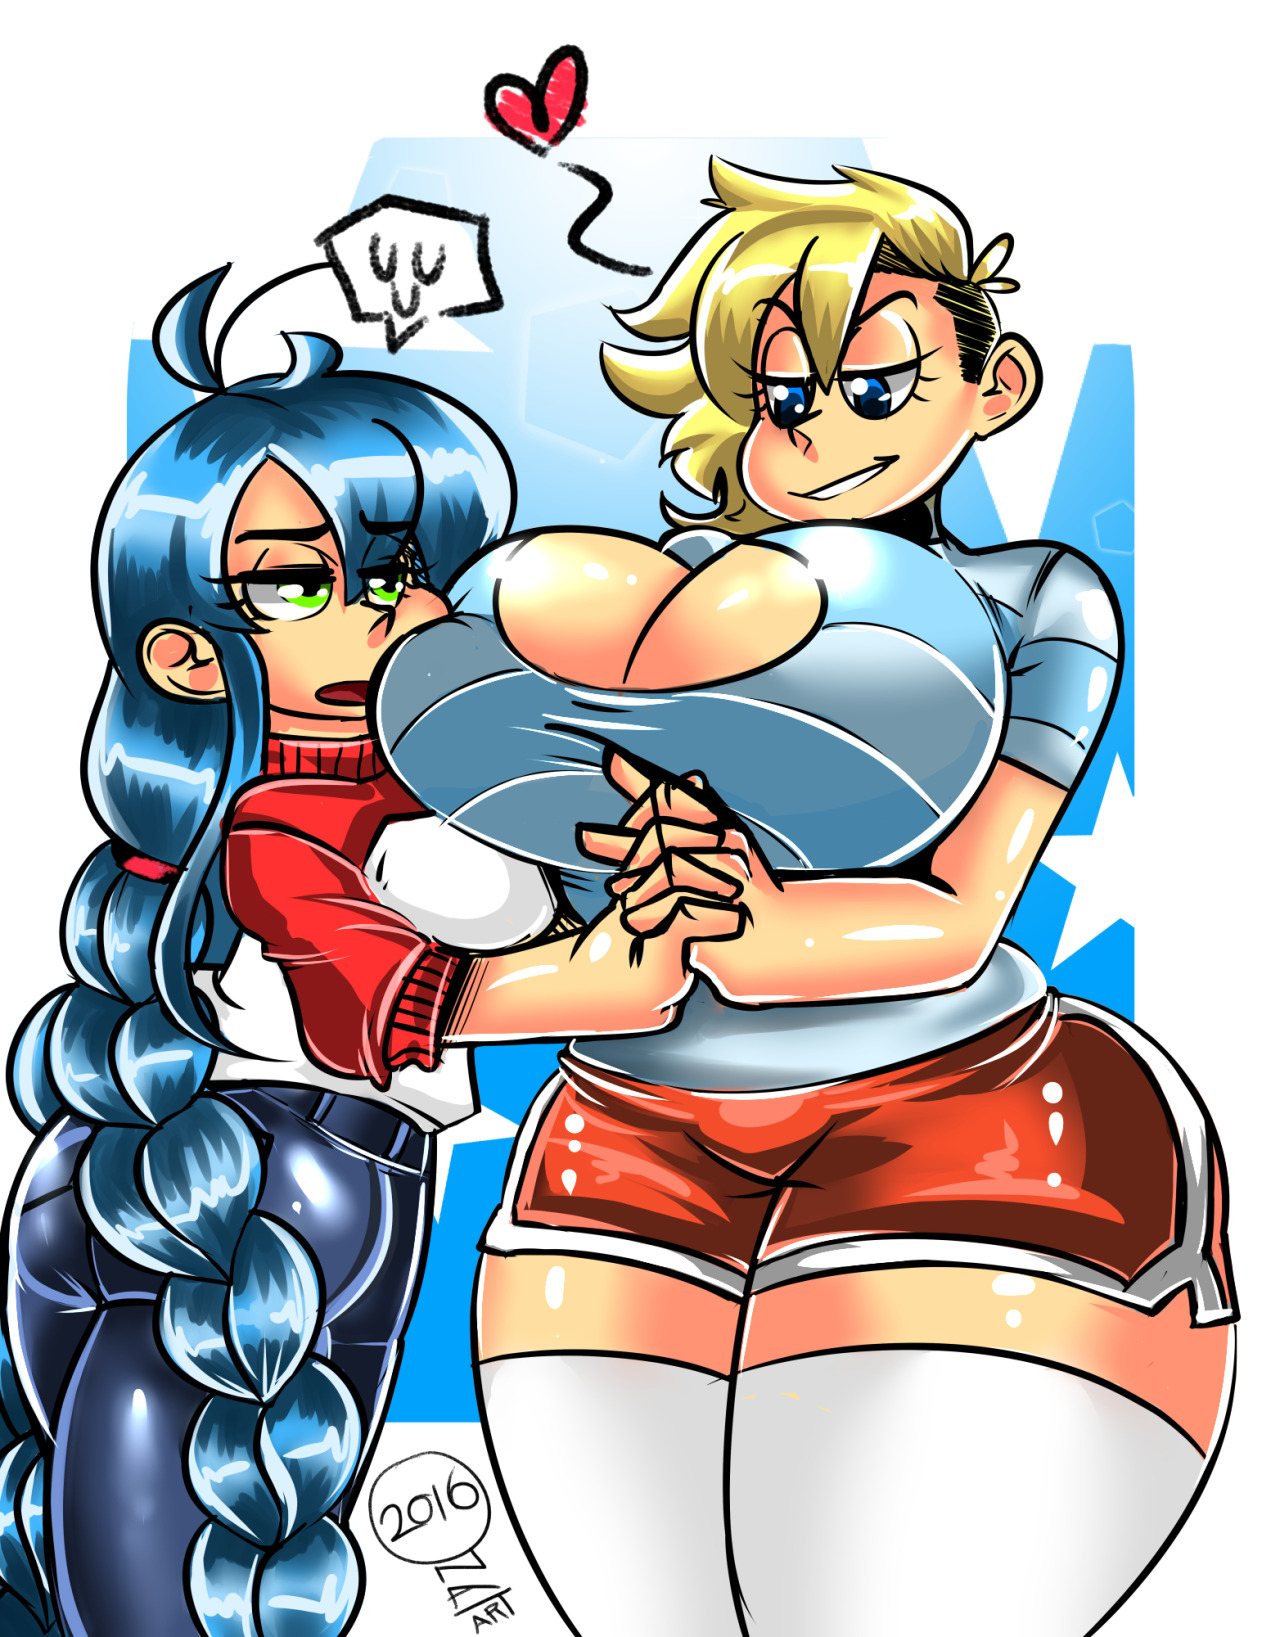 Kassie and Caren Pin -up! Just wanted to draw them again, i might draw them again